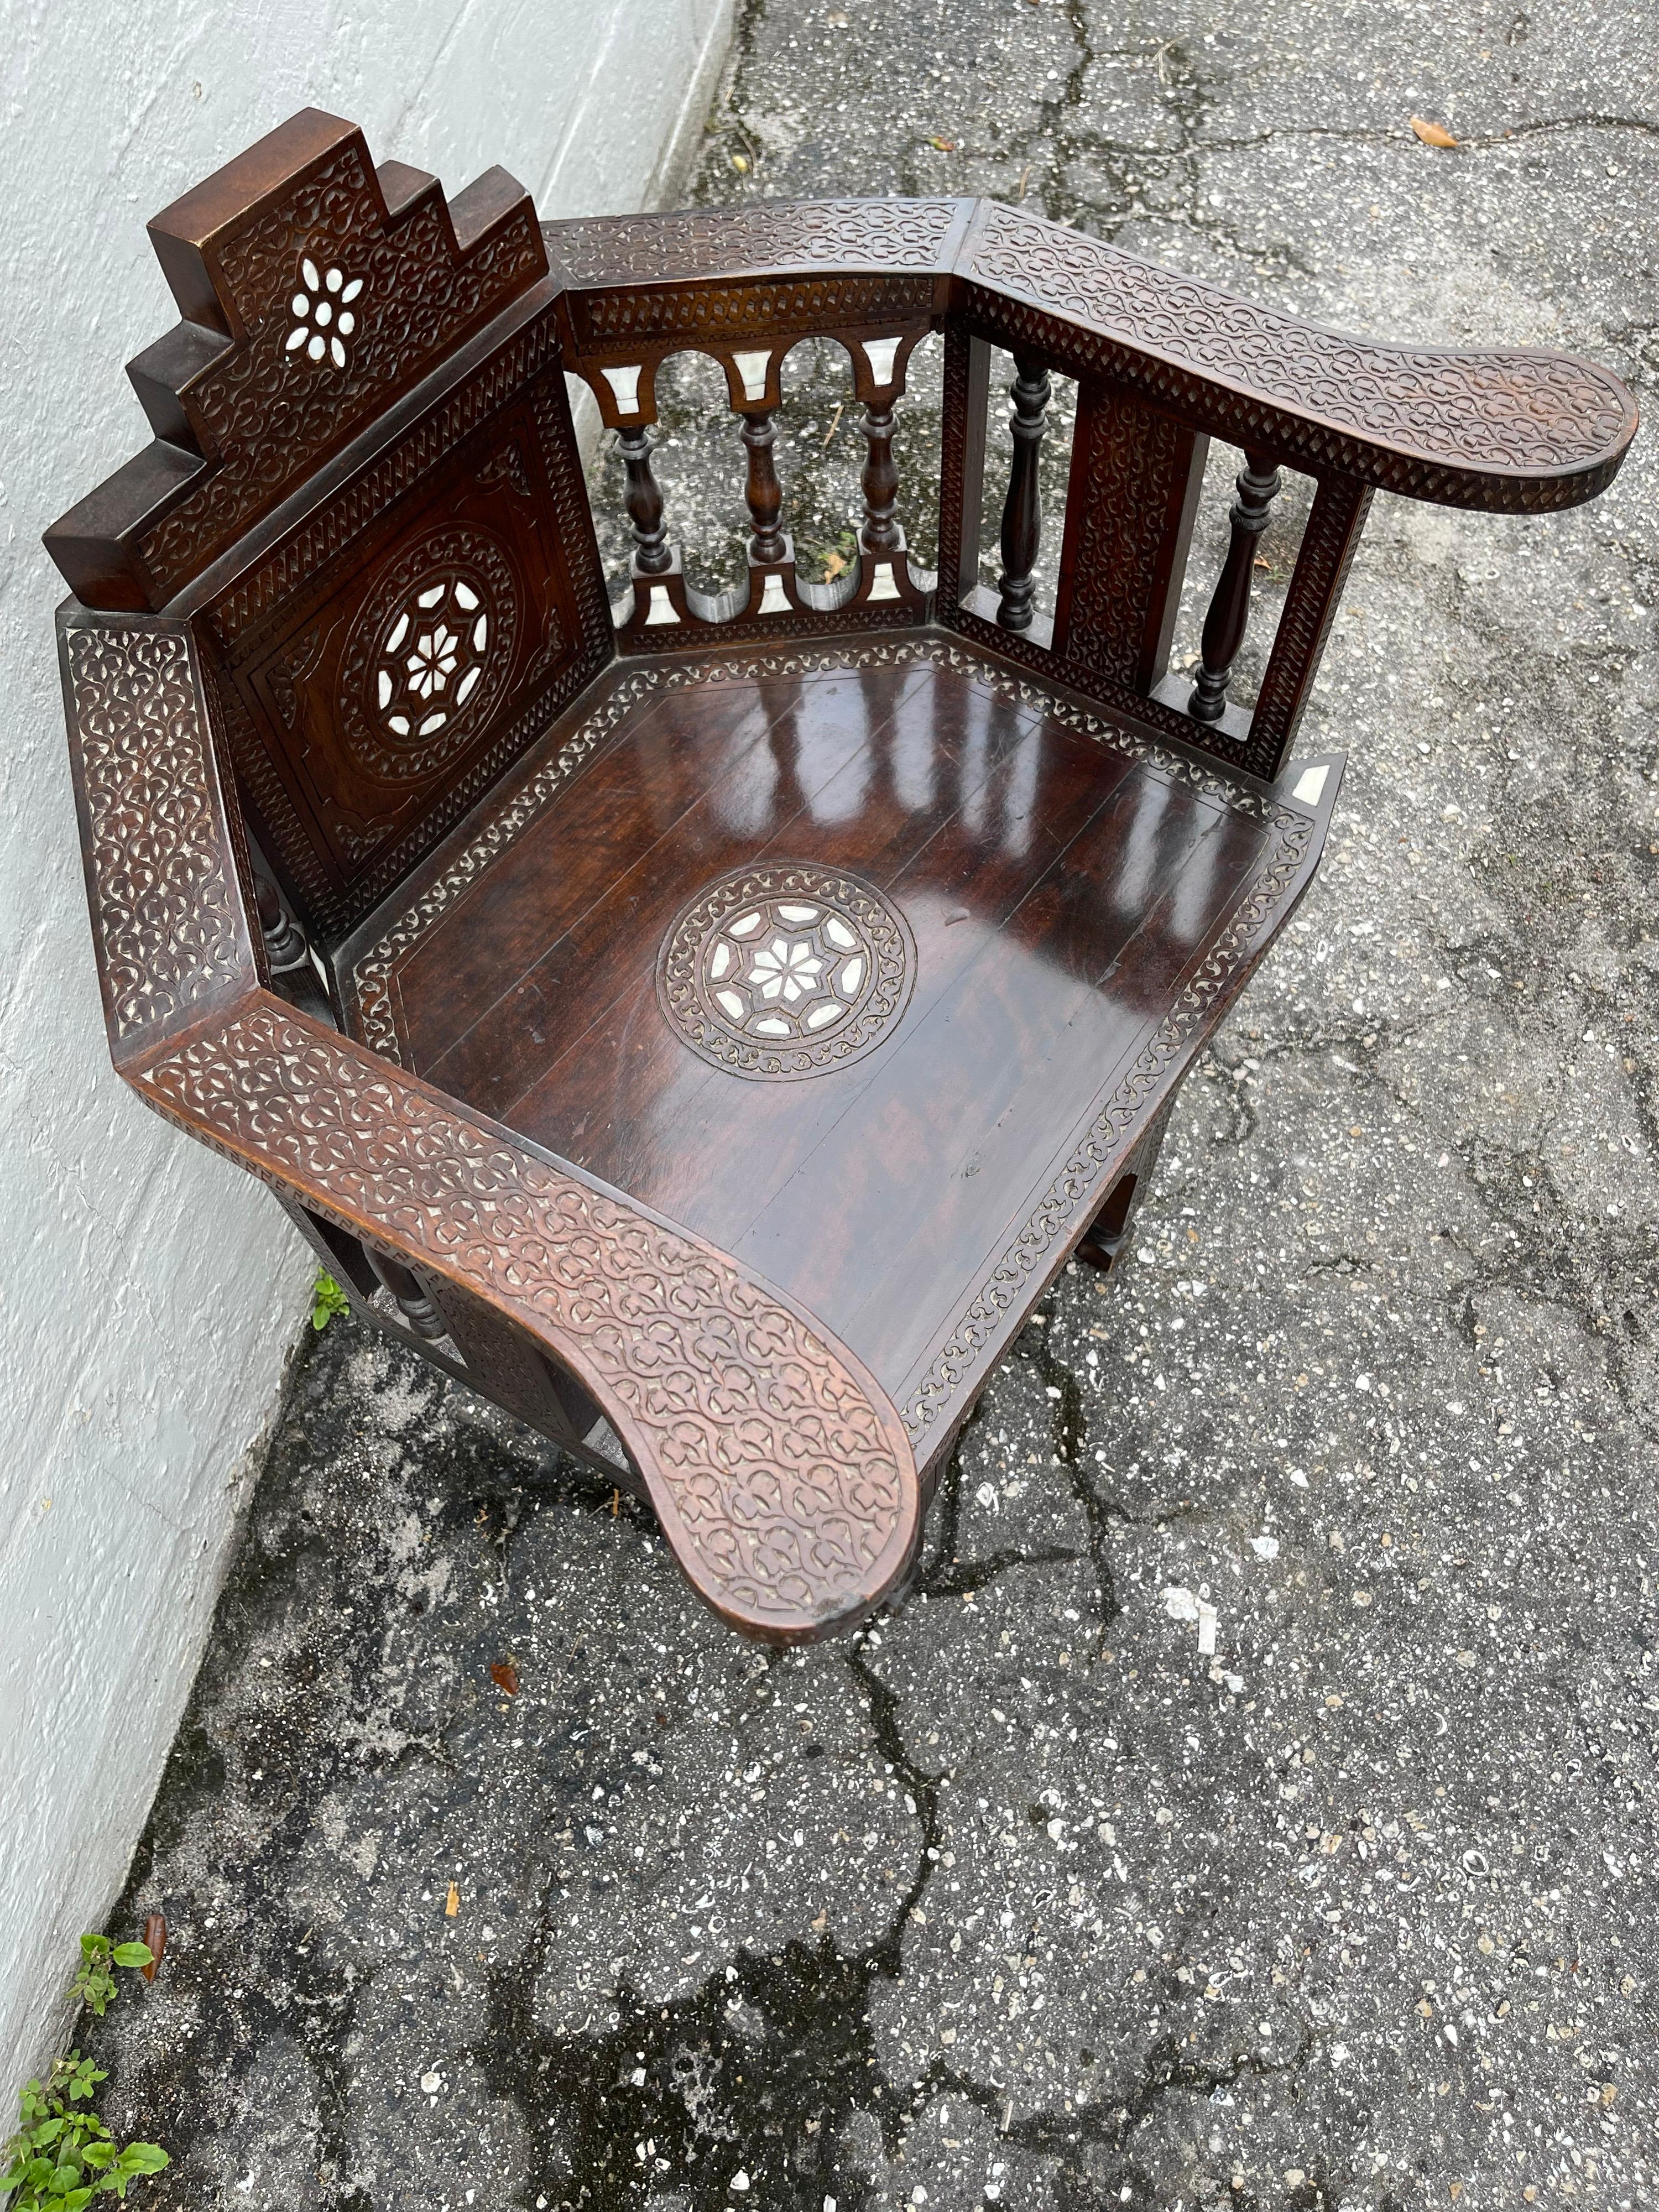 Middle Eastern Mother of Pearl Inlaid Armchair In Good Condition For Sale In West Palm Beach, FL